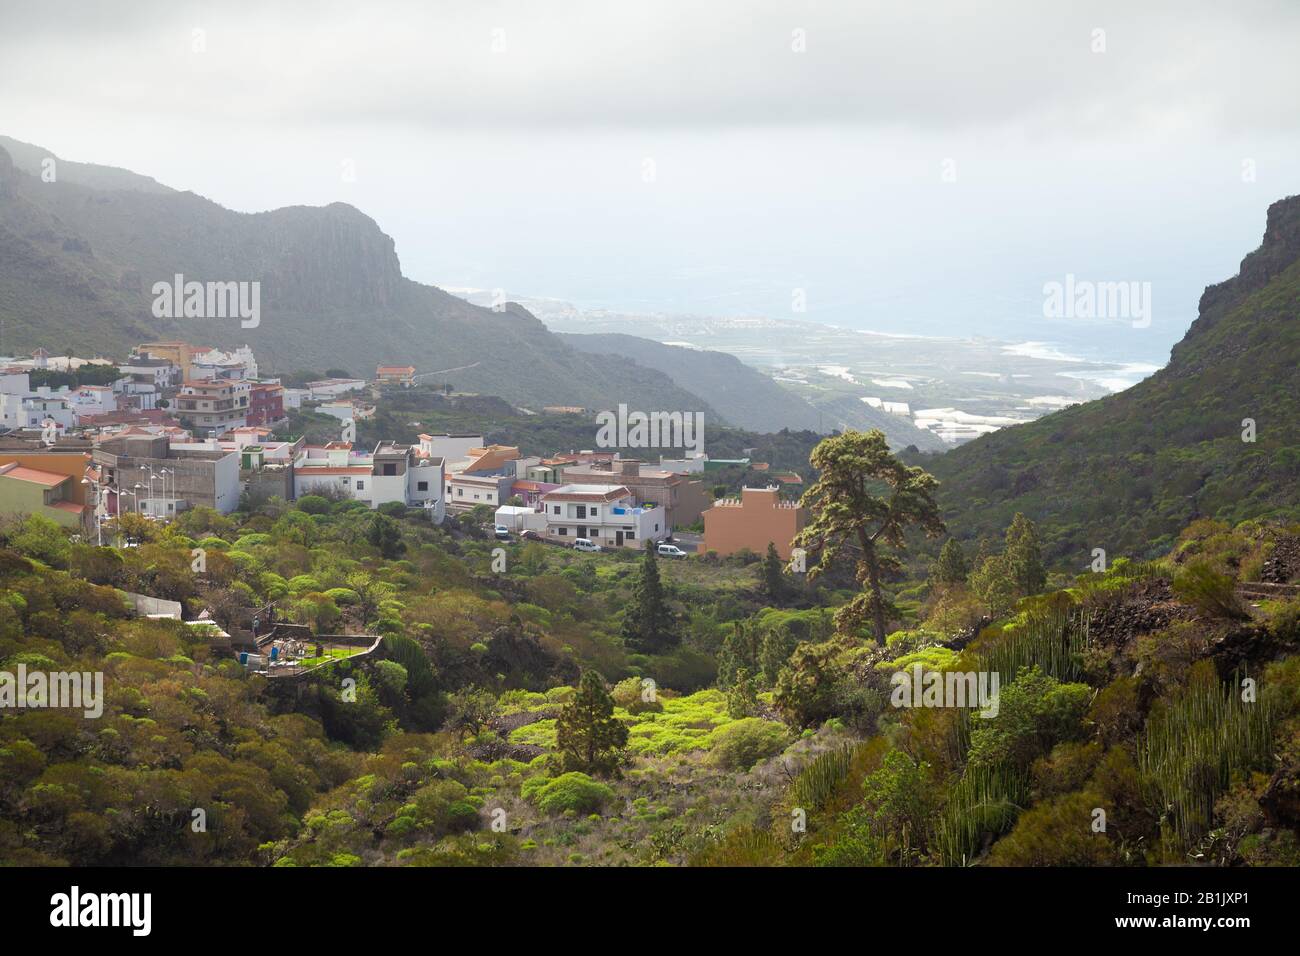 The small village of Tamaimo set in the hillside near Los Gigantes, Tenerife, Spain. Stock Photo